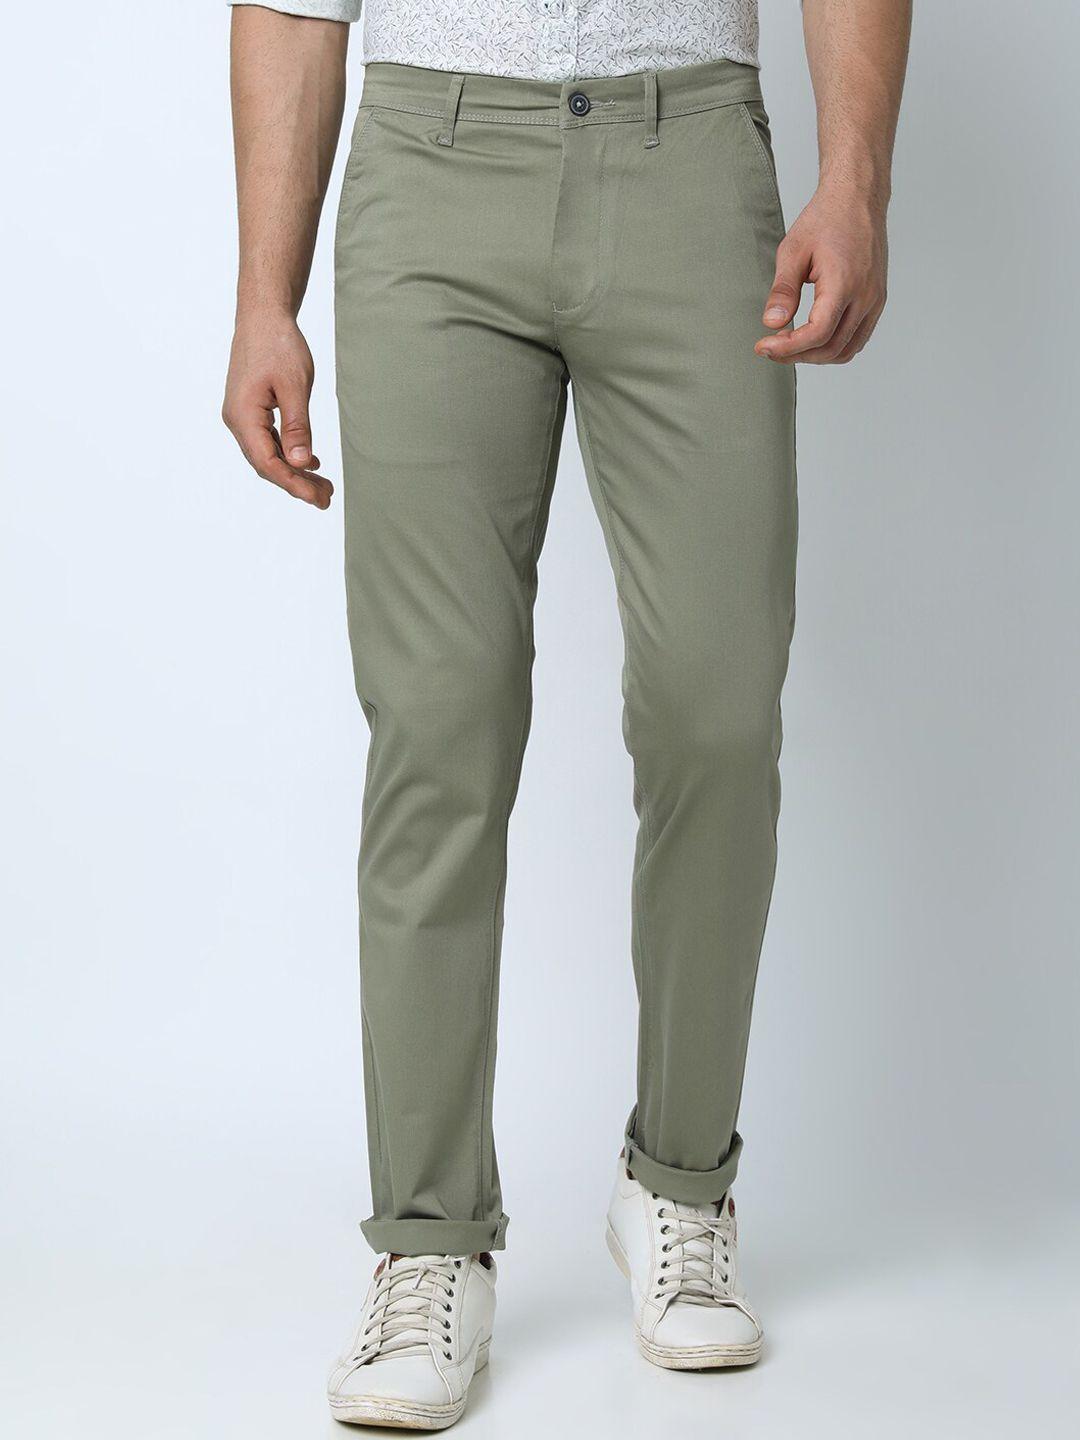 oxemberg men slim fit cotton chinos trousers